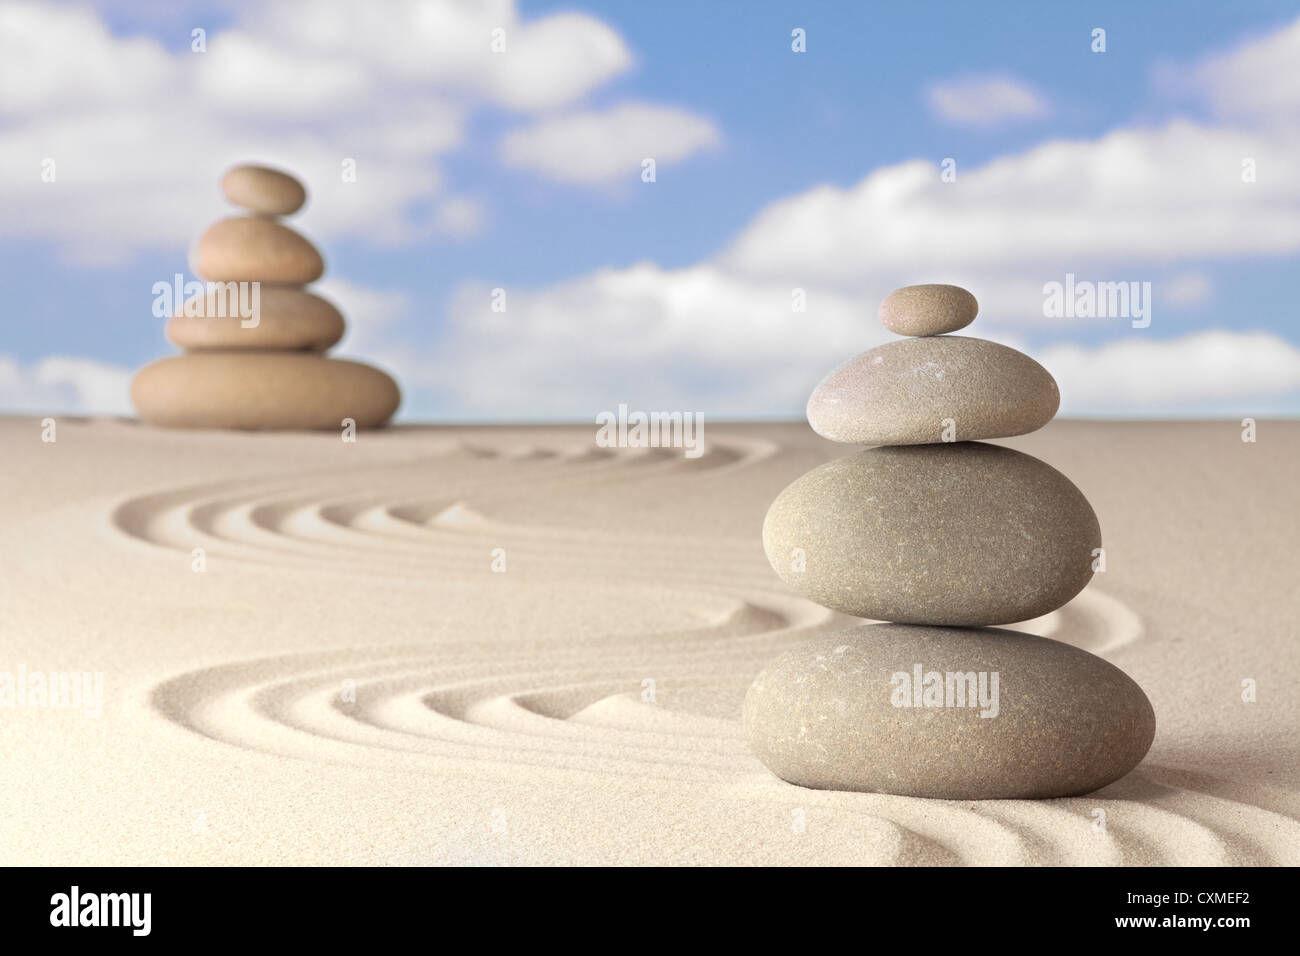 Spirituality and balance in a Japanese zen garden Sand and stone pattern concept for relaxation and concentration Stock Photo